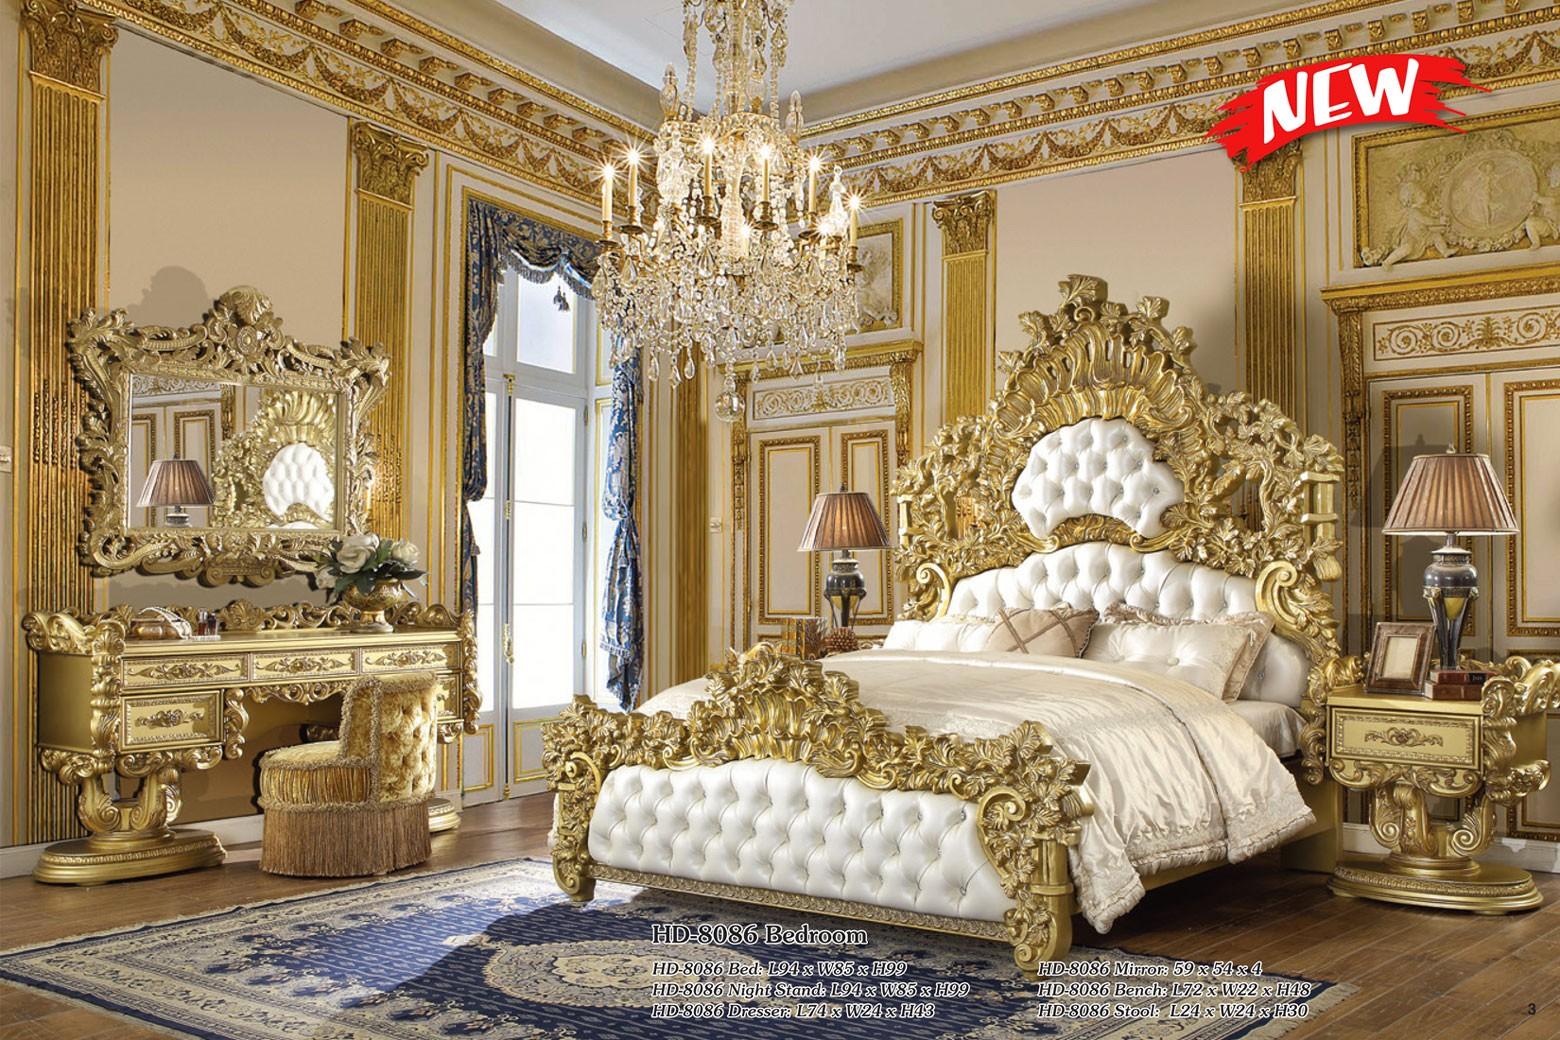 Traditional Sleigh Bedroom Set HD-8086 HD-8086-BSET5-EK in Rich Gold Faux Leather